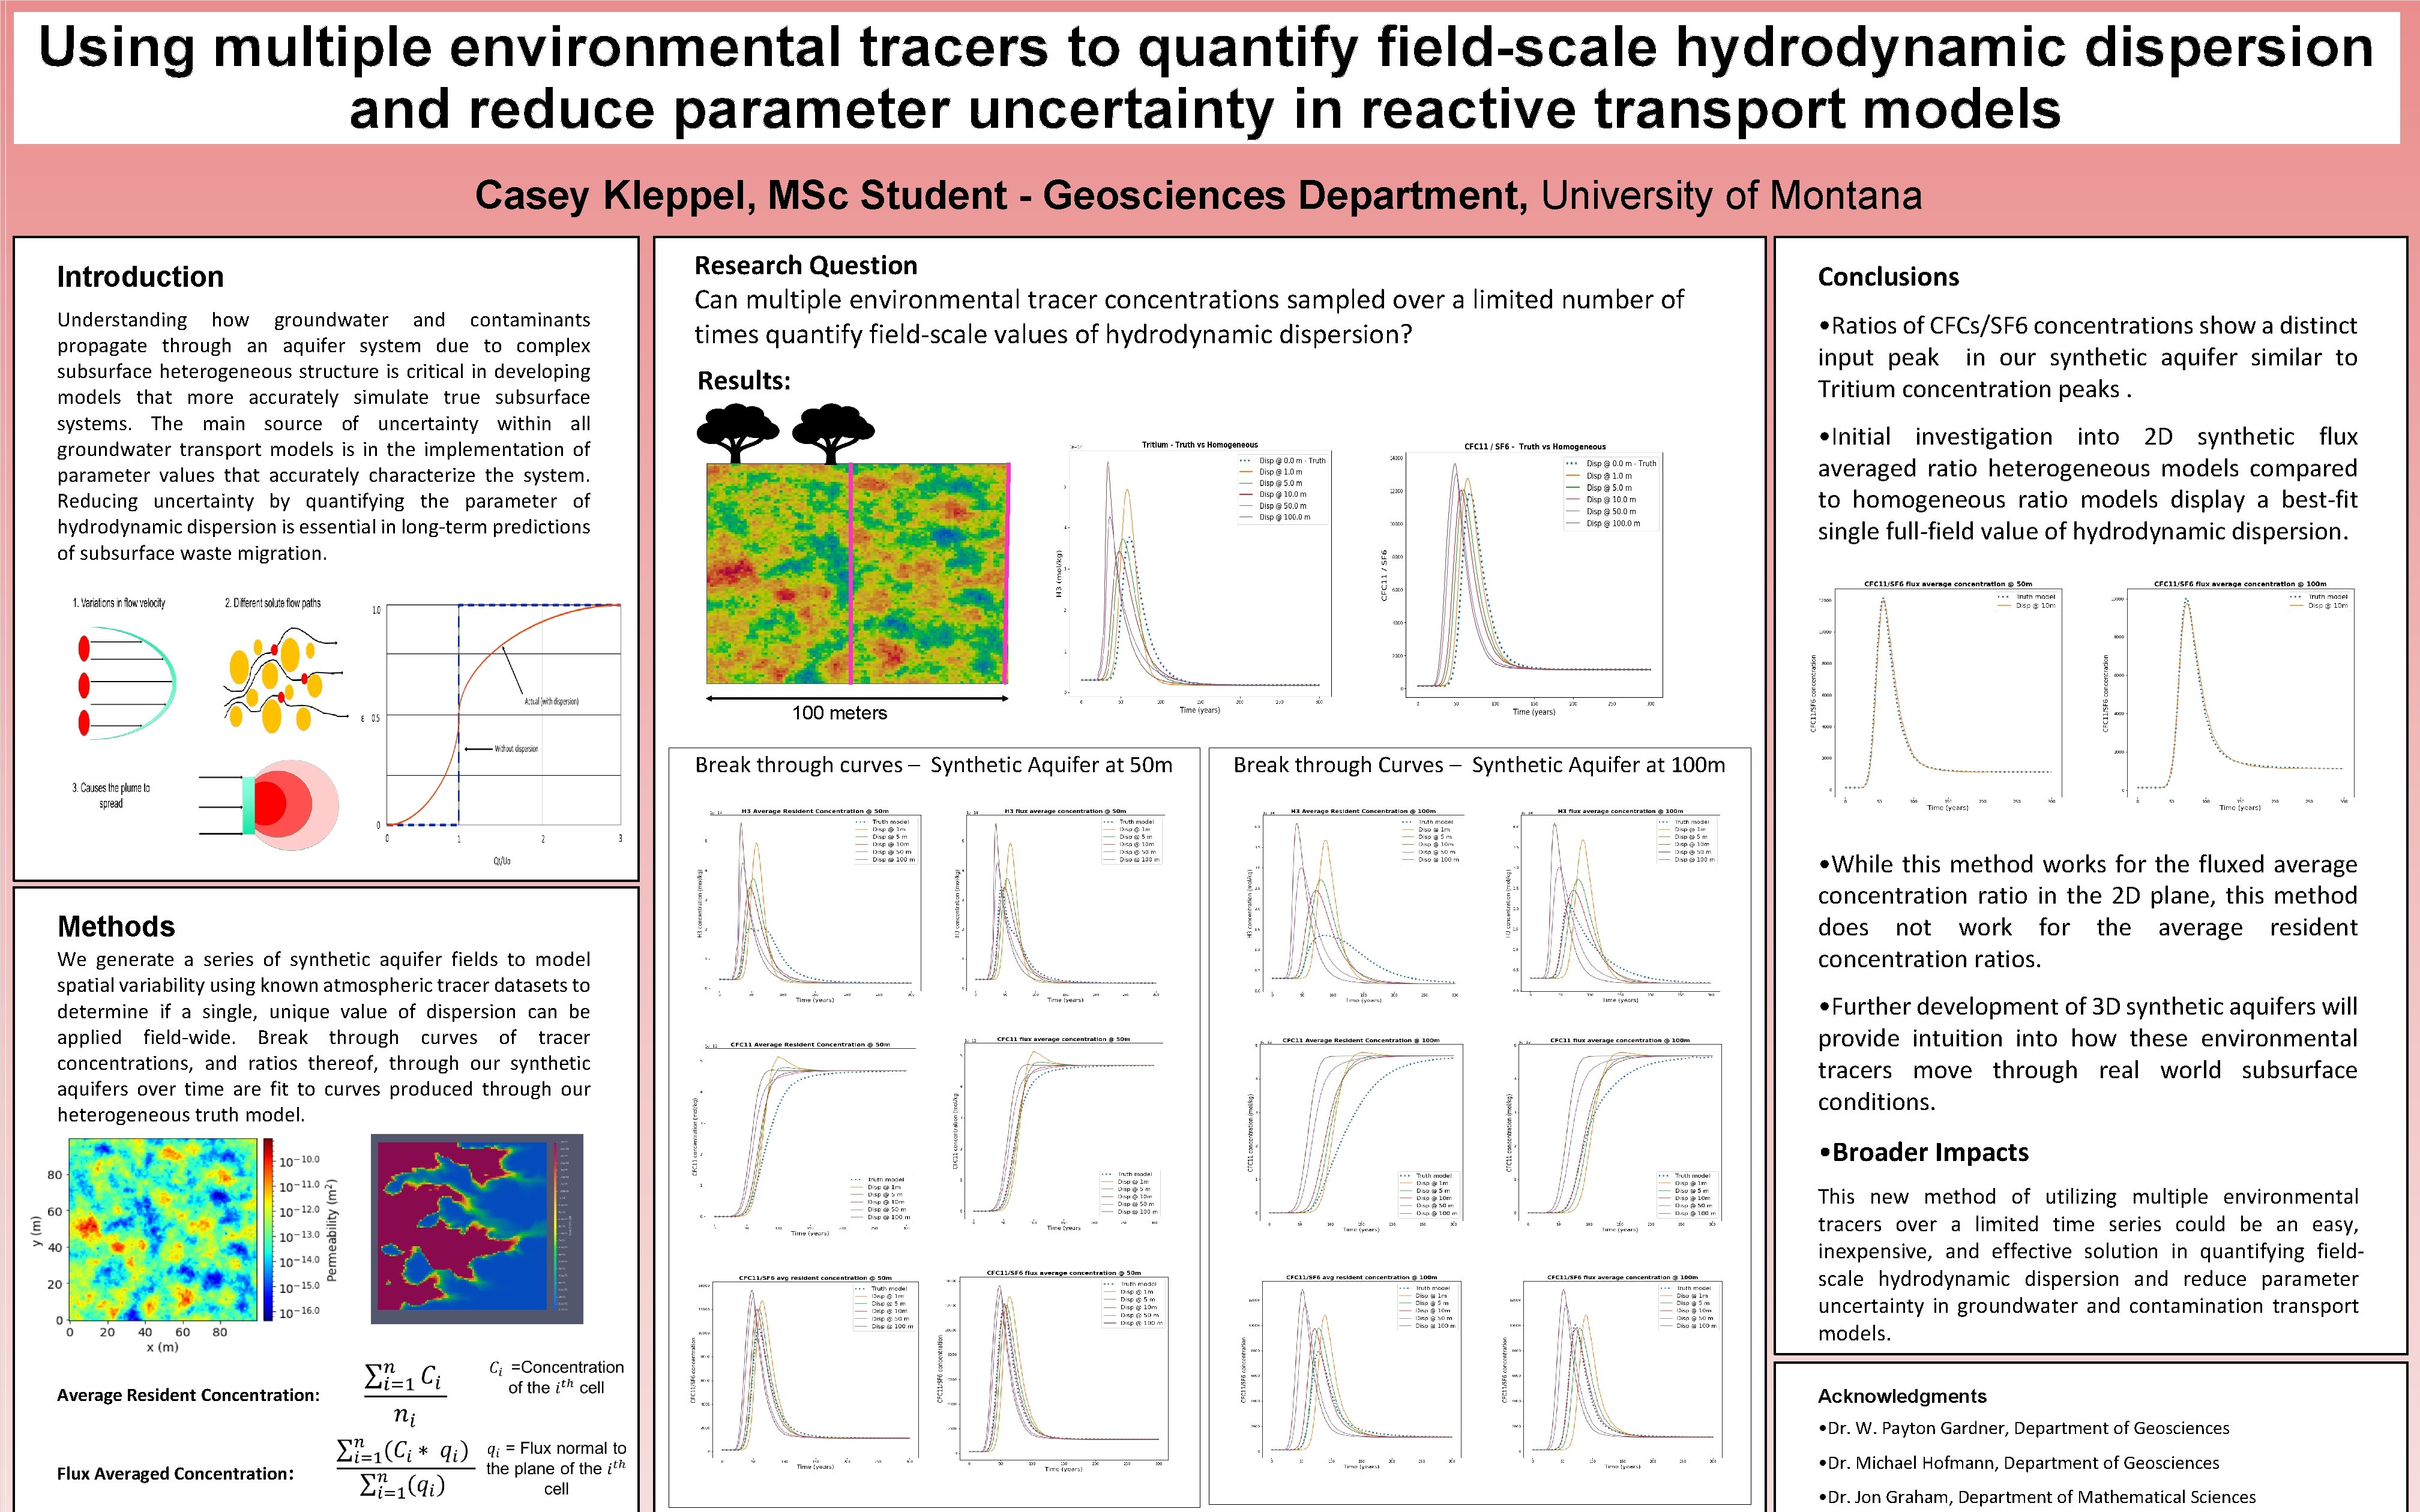 Using multiple environmental tracers to quantify field-scale hydrodynamic dispersion and reduce parameter uncertainty in